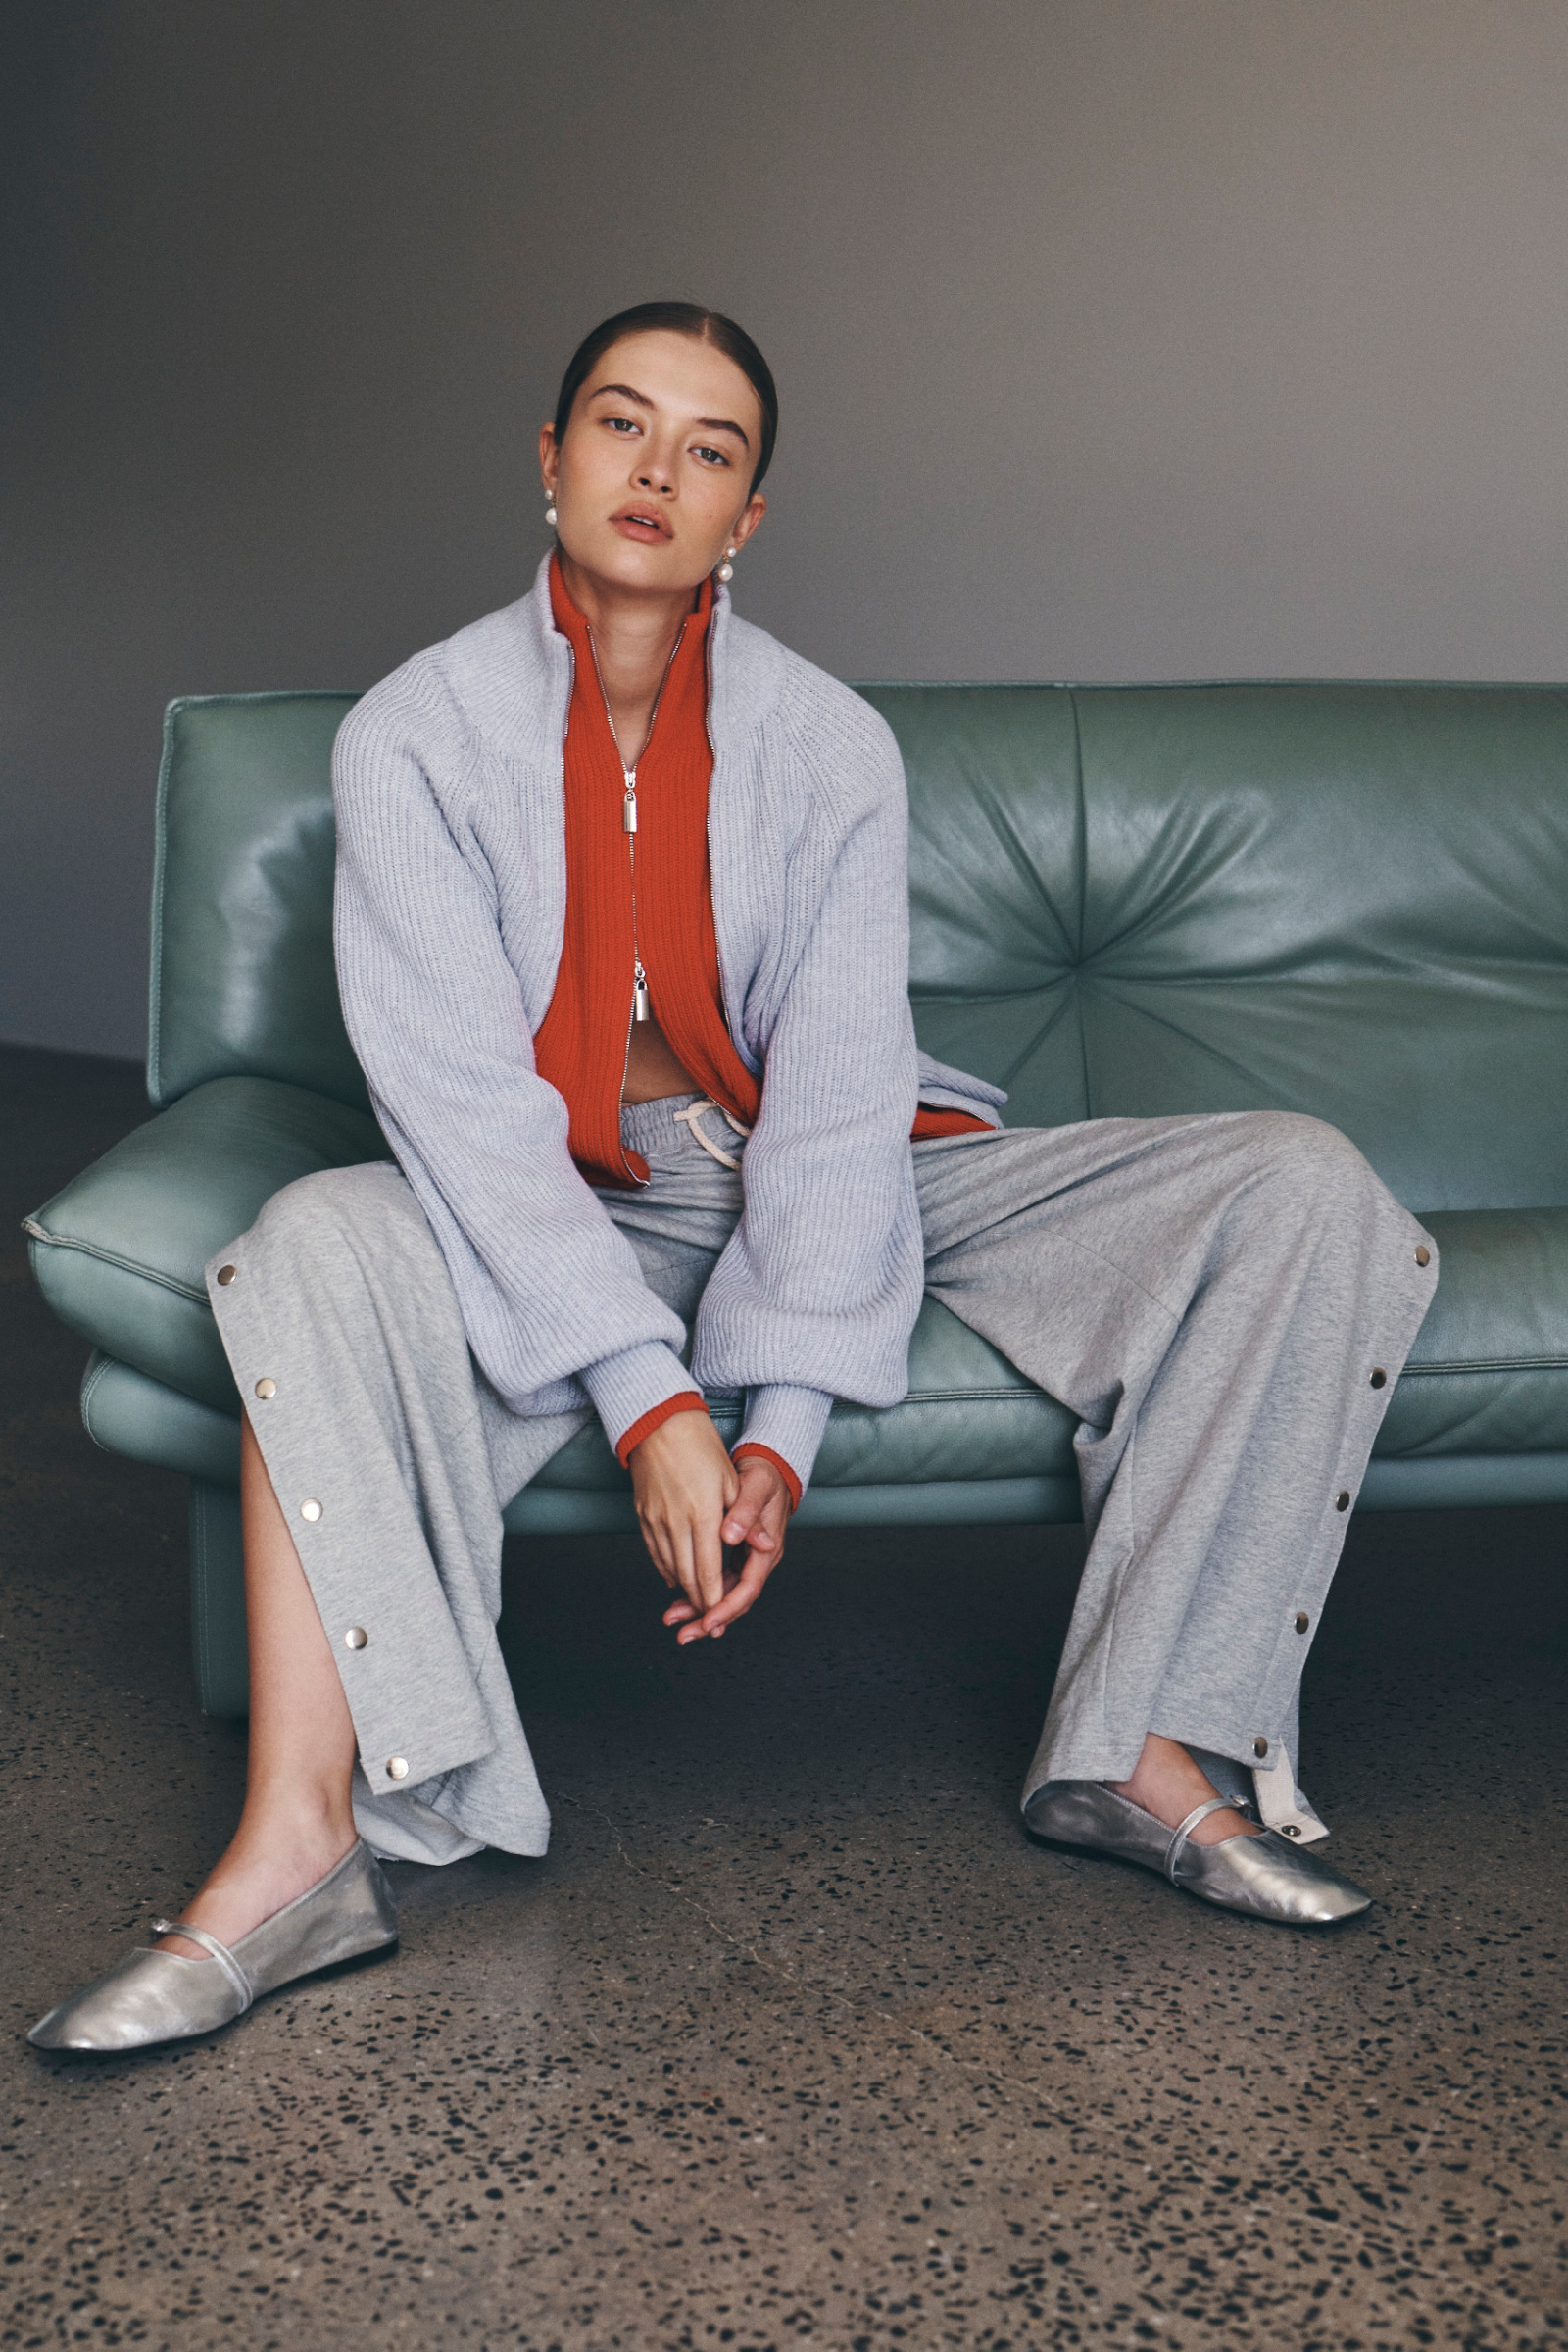 Bianca wears the Banjo Zip Knit Cardigan in both Crimson Red and Grey Marle paired with the Vena Terry Snap Pants in Grey Marle. Bianca lounges on a green leather sofa and accessorises with pearl drop earrings and silver ballet flats.